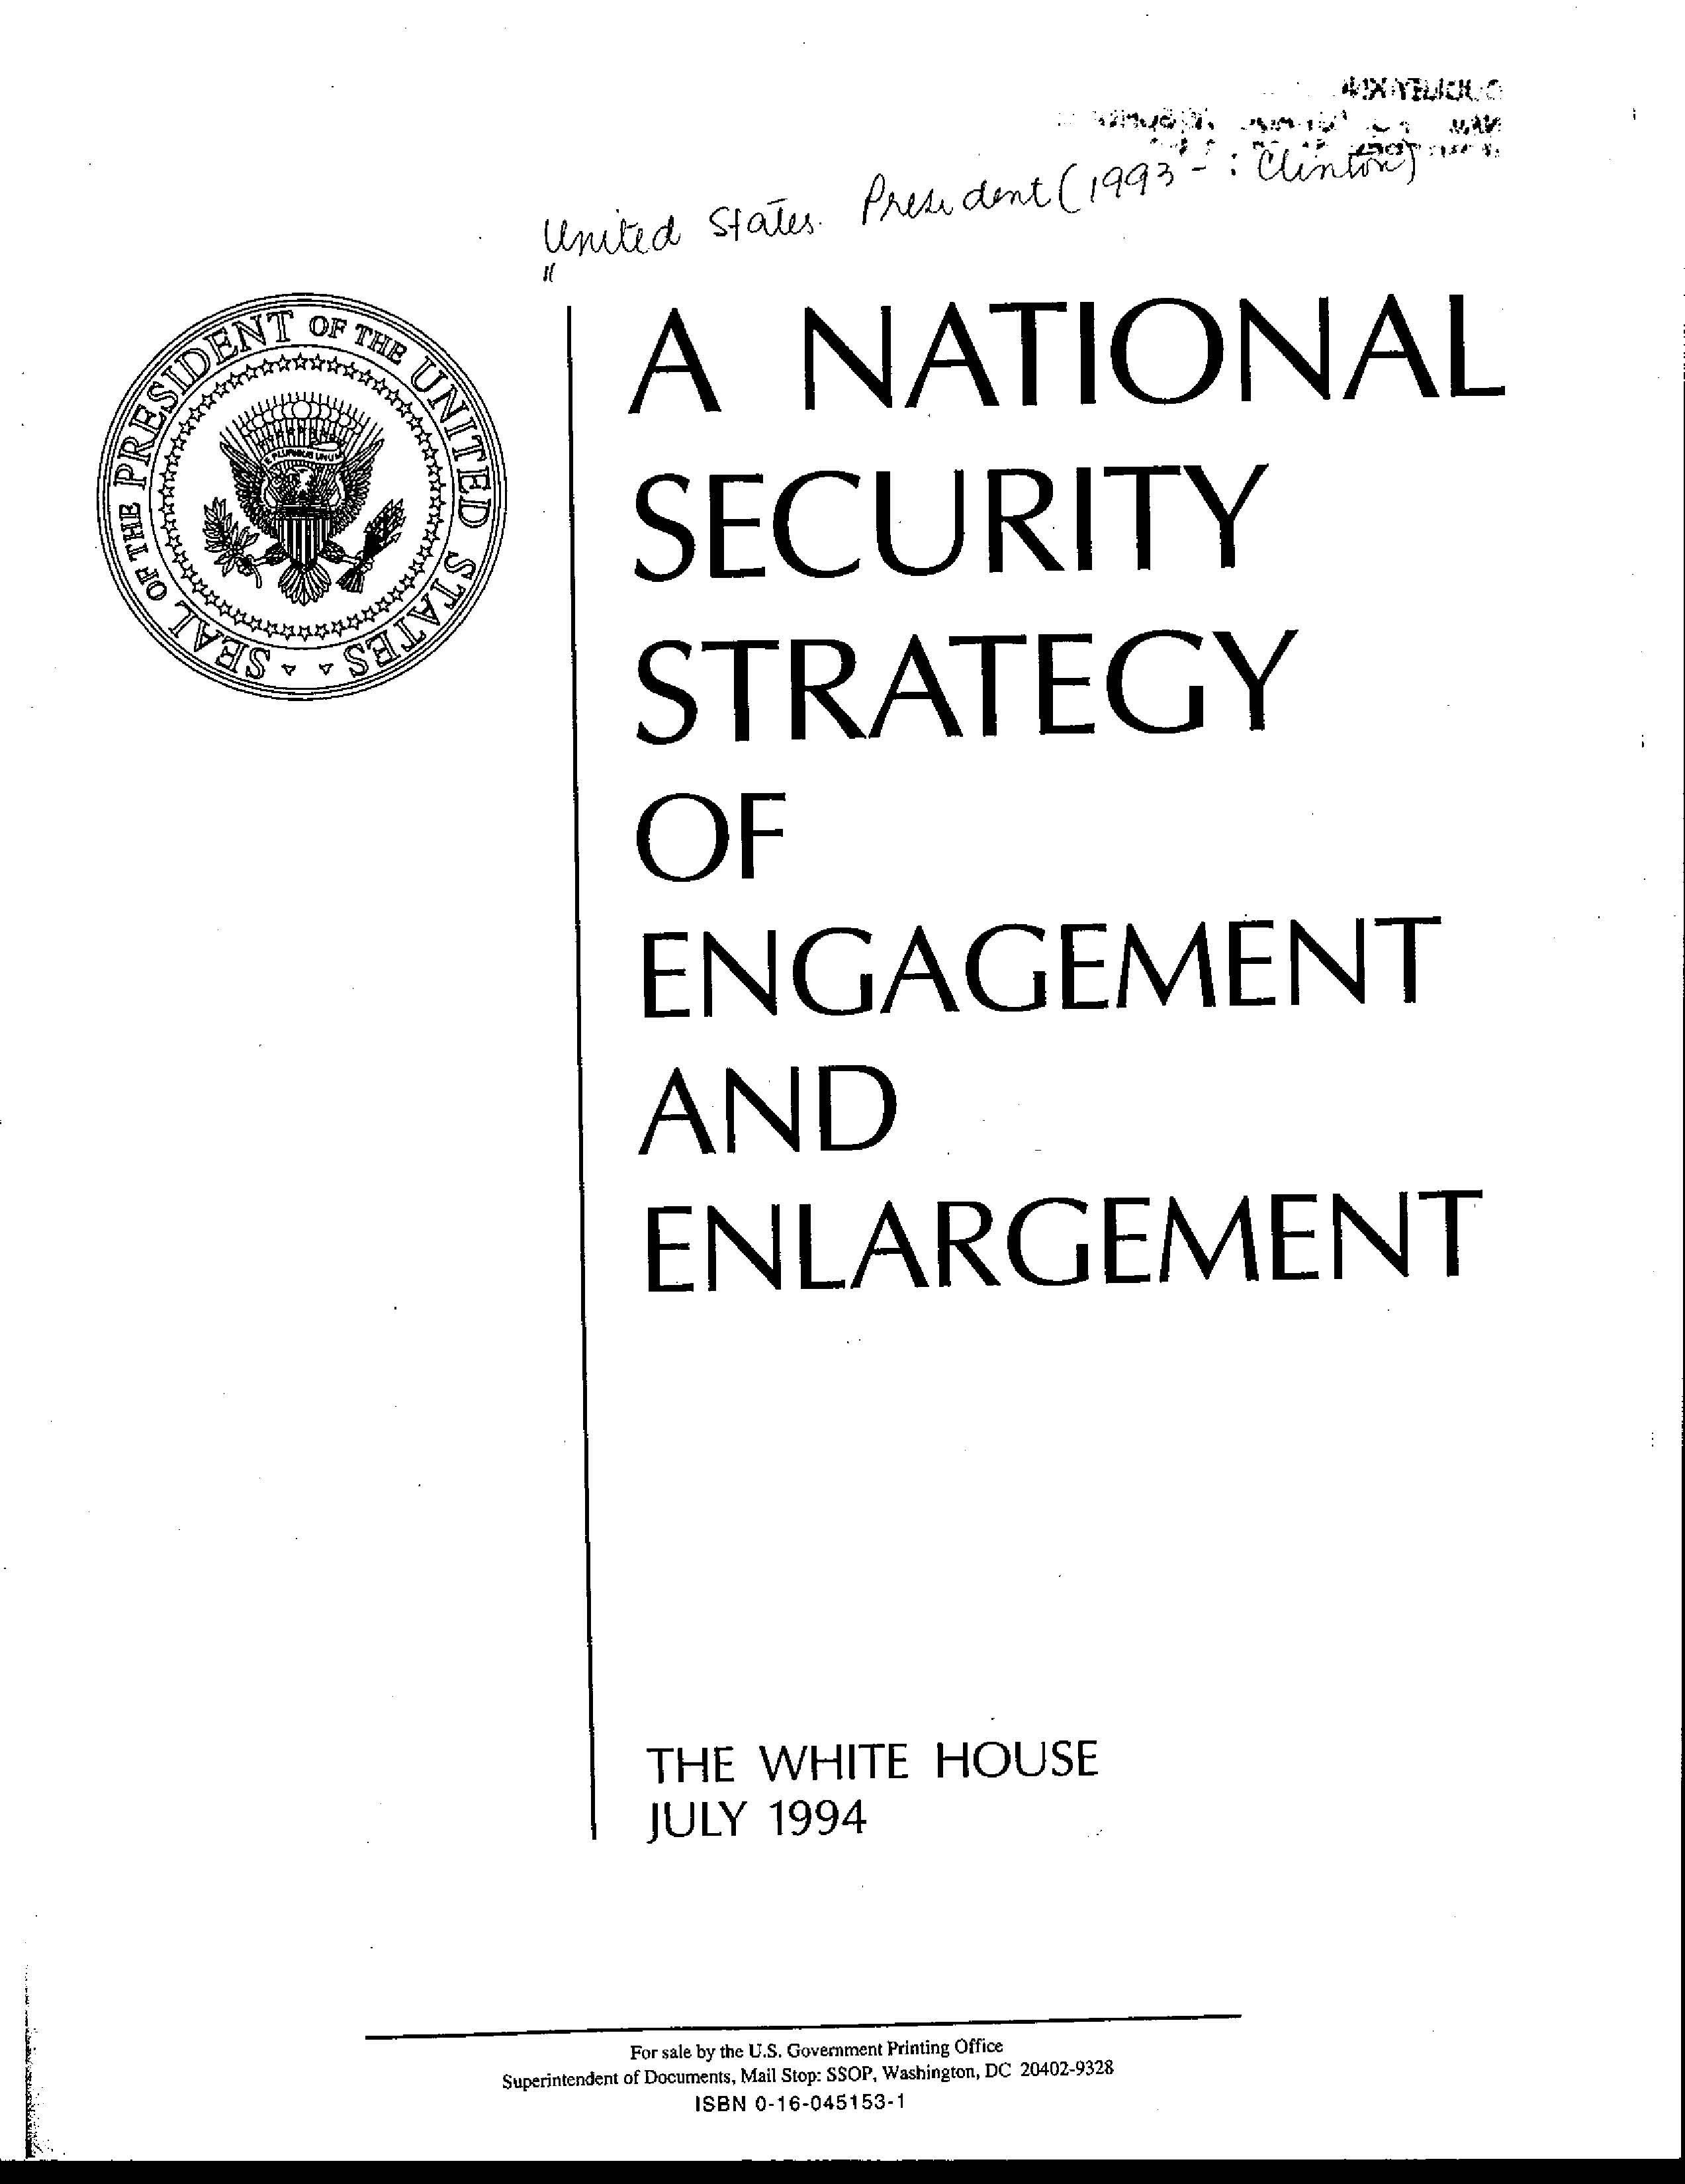 William J. Clinton. (Jul. 01, 1994). A National Security Strategy of Engagement and Enlargement. ISBN 0-16-045153-1, U.S. Government Printing Office (GPO), NSSArchive. The White House.